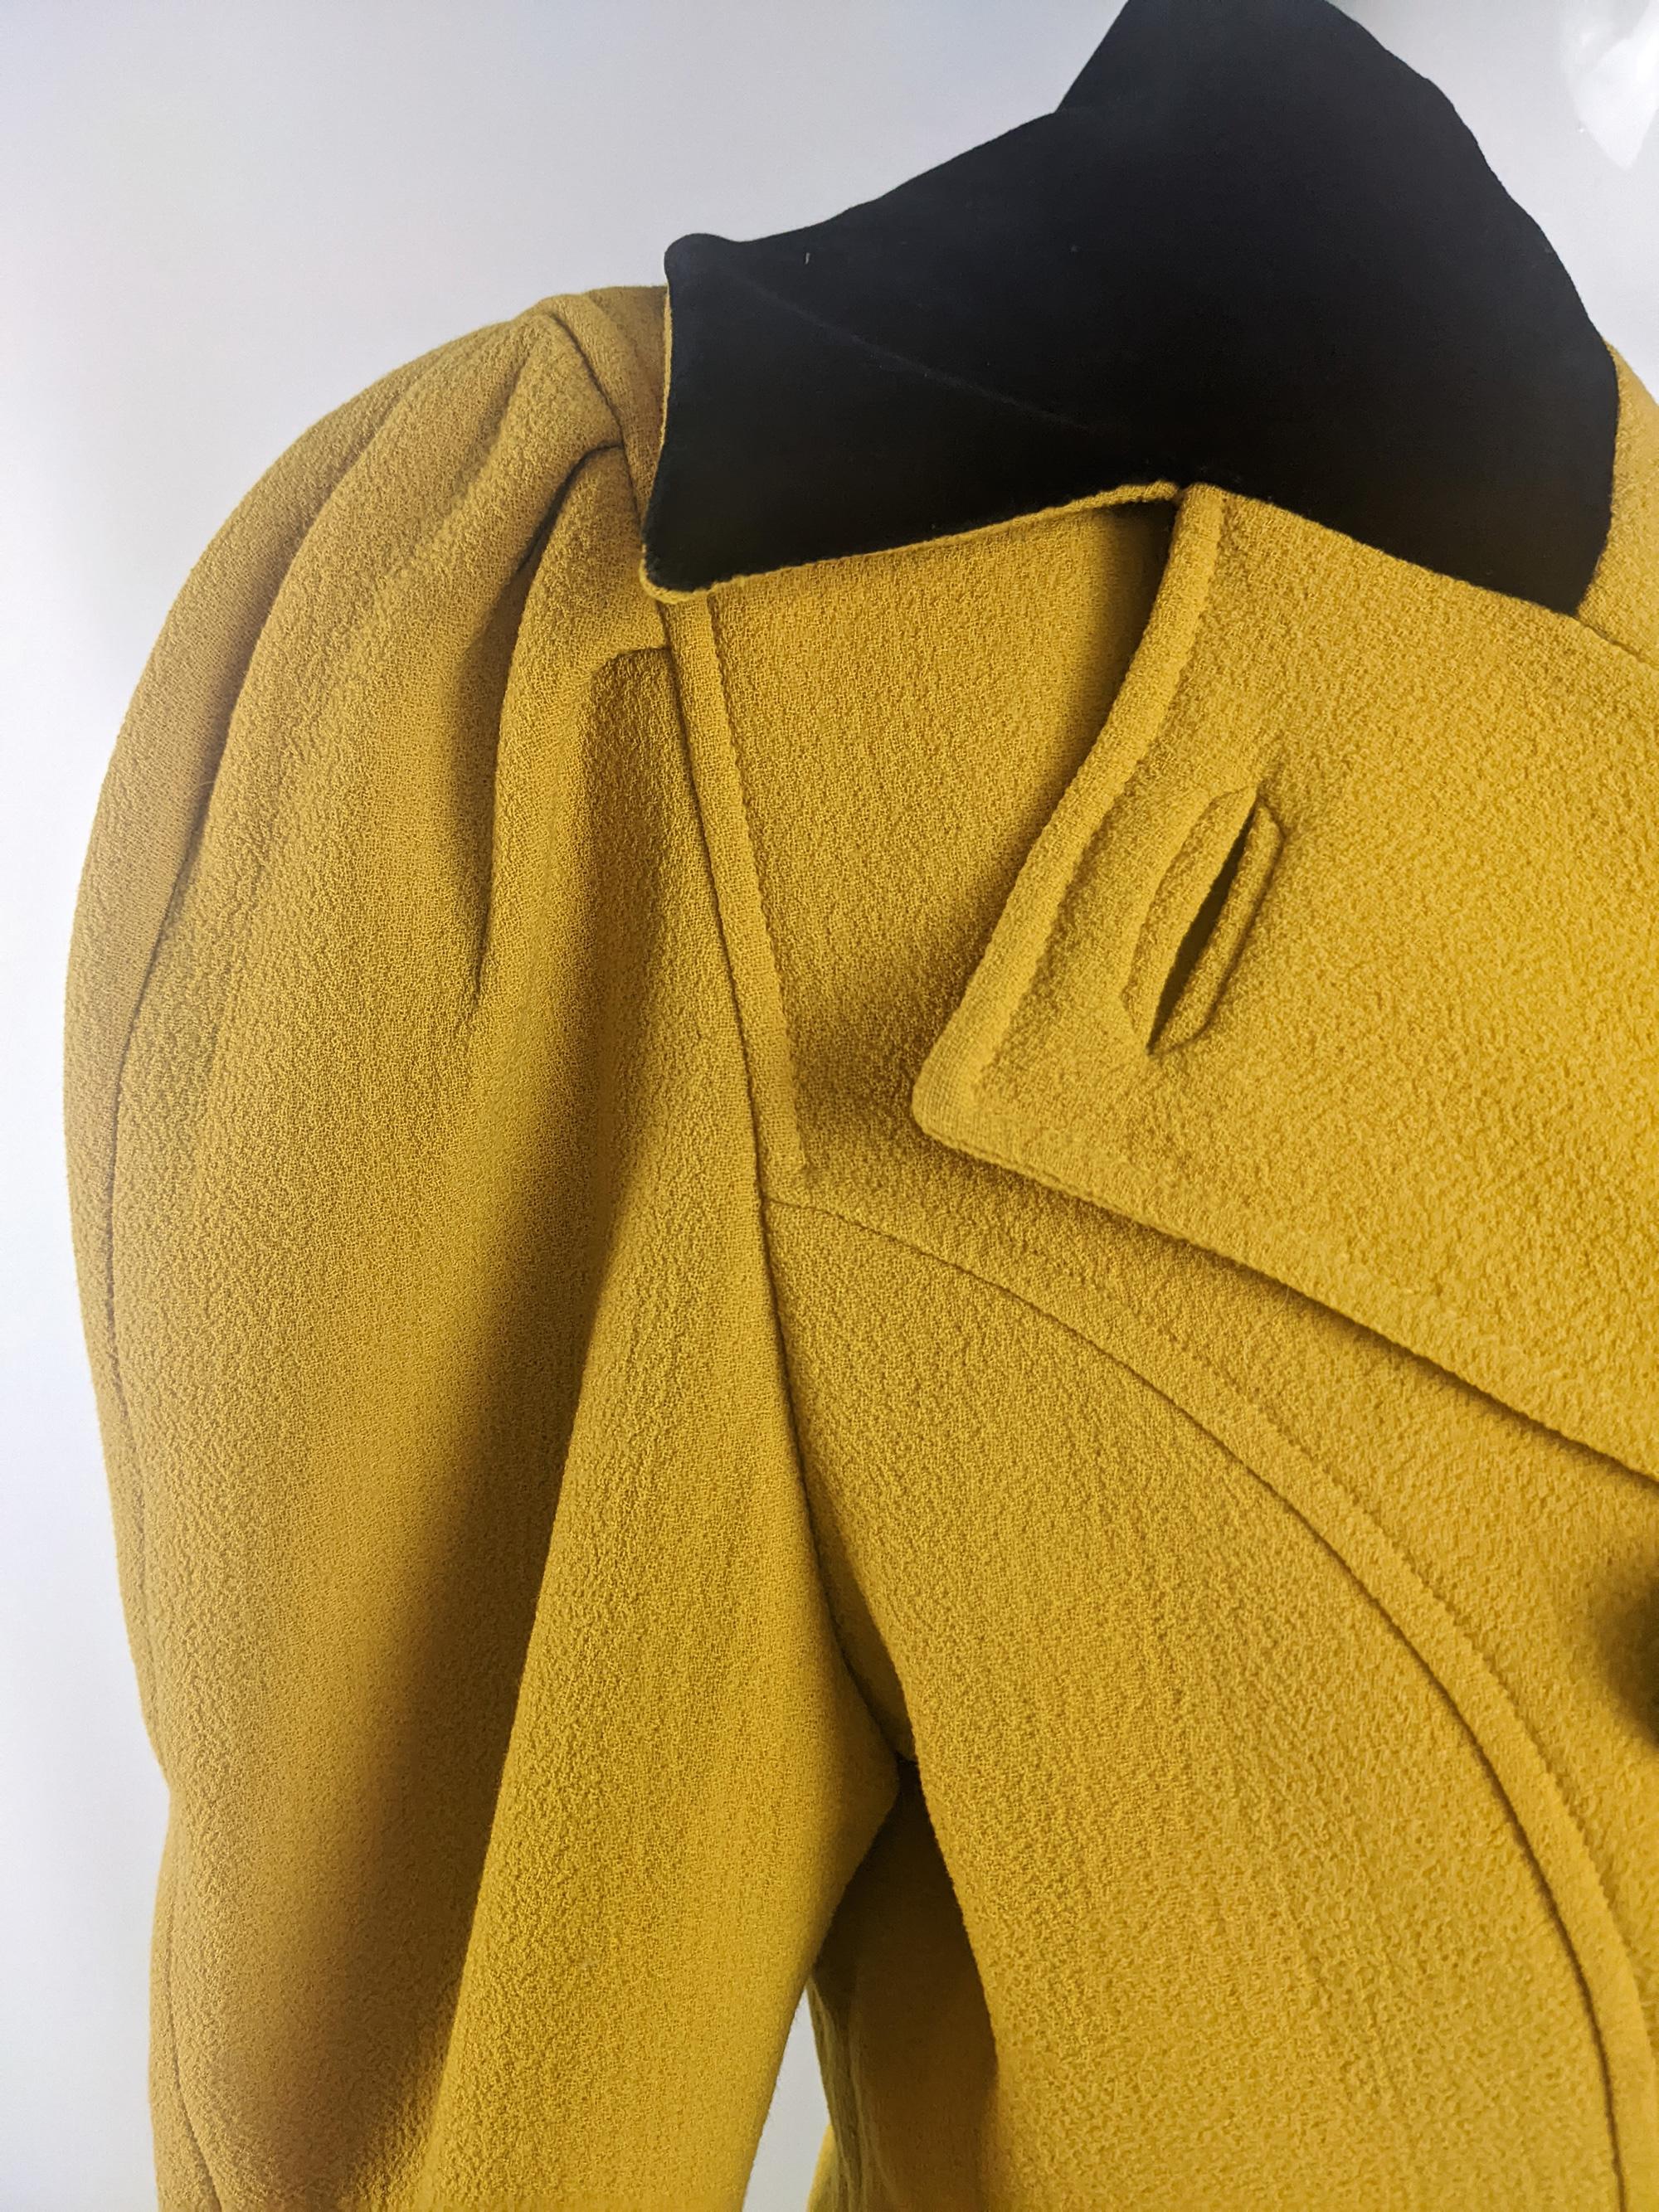 Christian Lacroix Vintage 1980s Mustard Yellow Riding Jacket Victorian Jacket For Sale 2